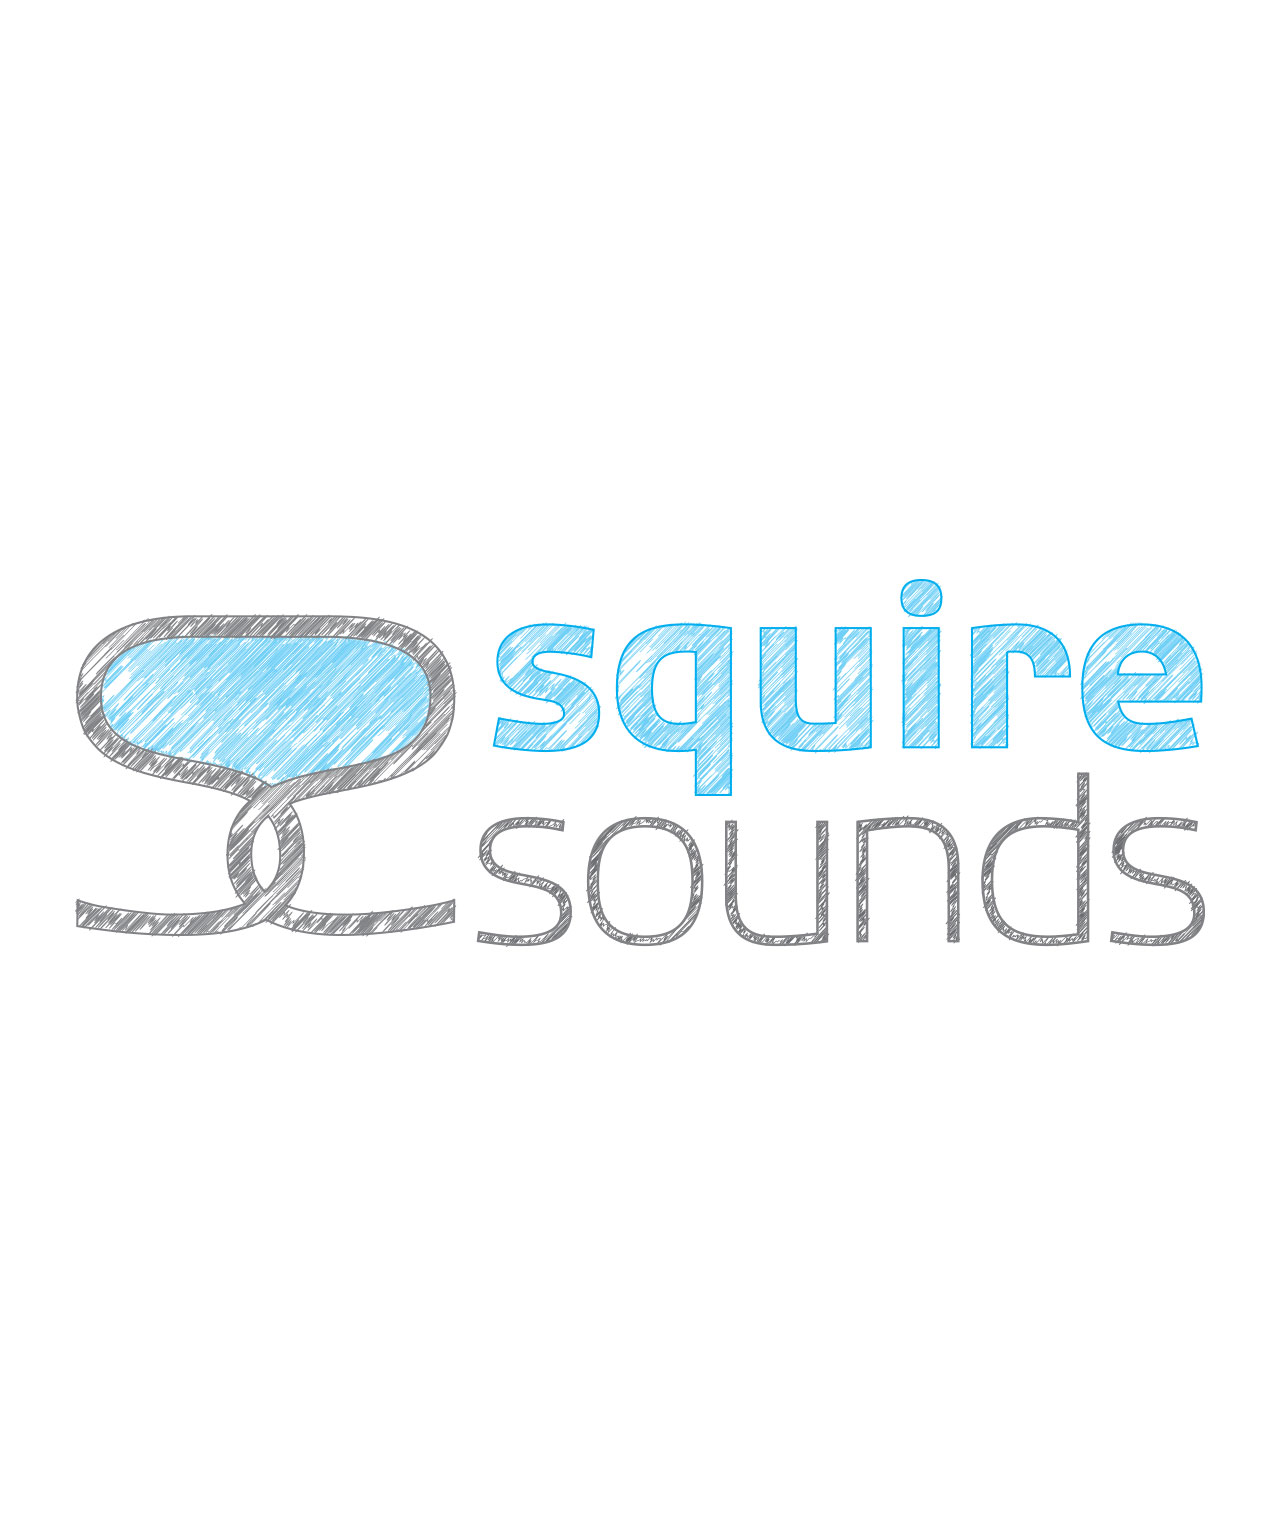 squire sounds